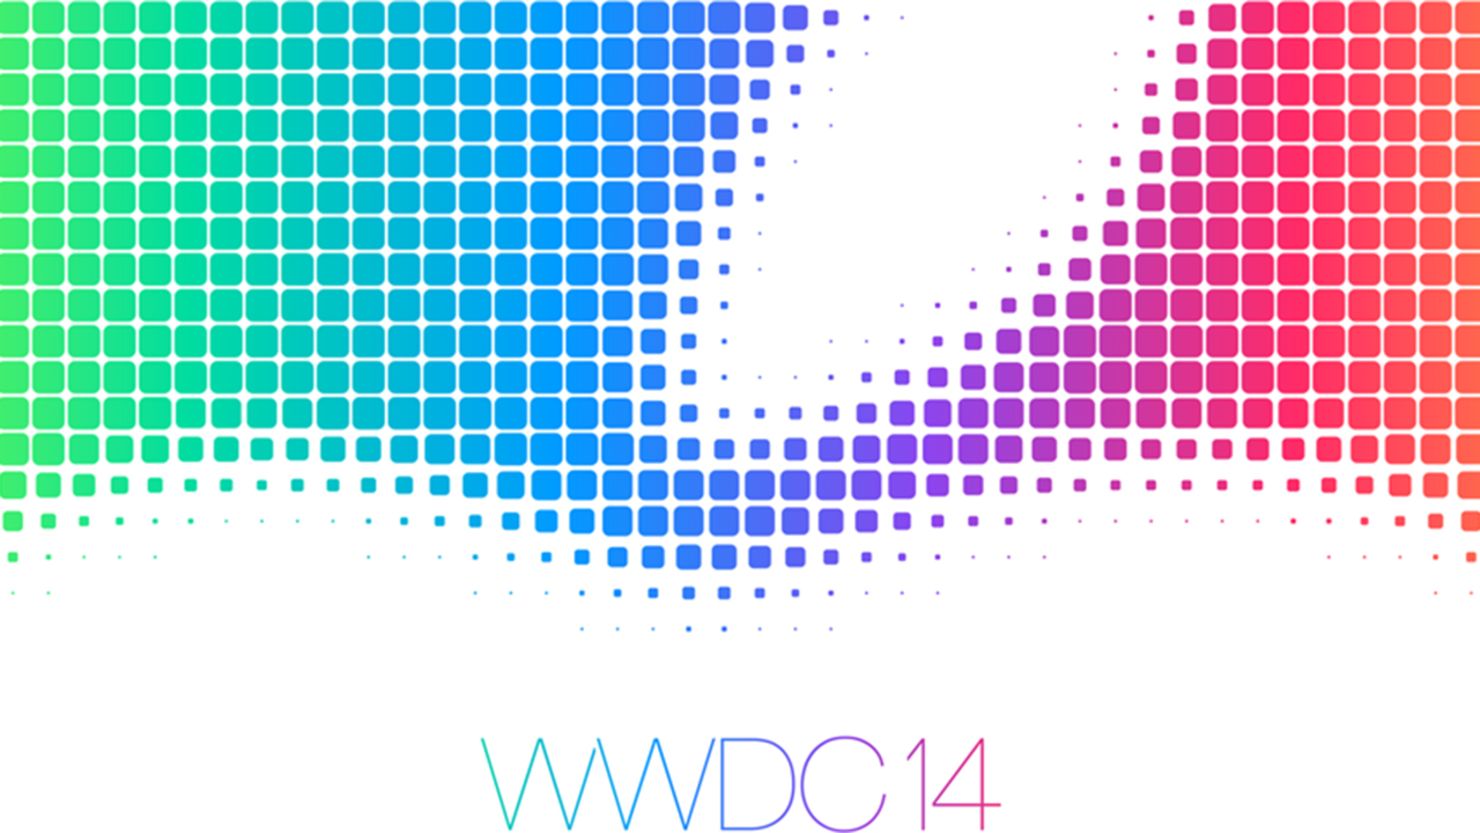 Apple's Worldwide Developers Conference, where the company unveils new features, begins June 2.